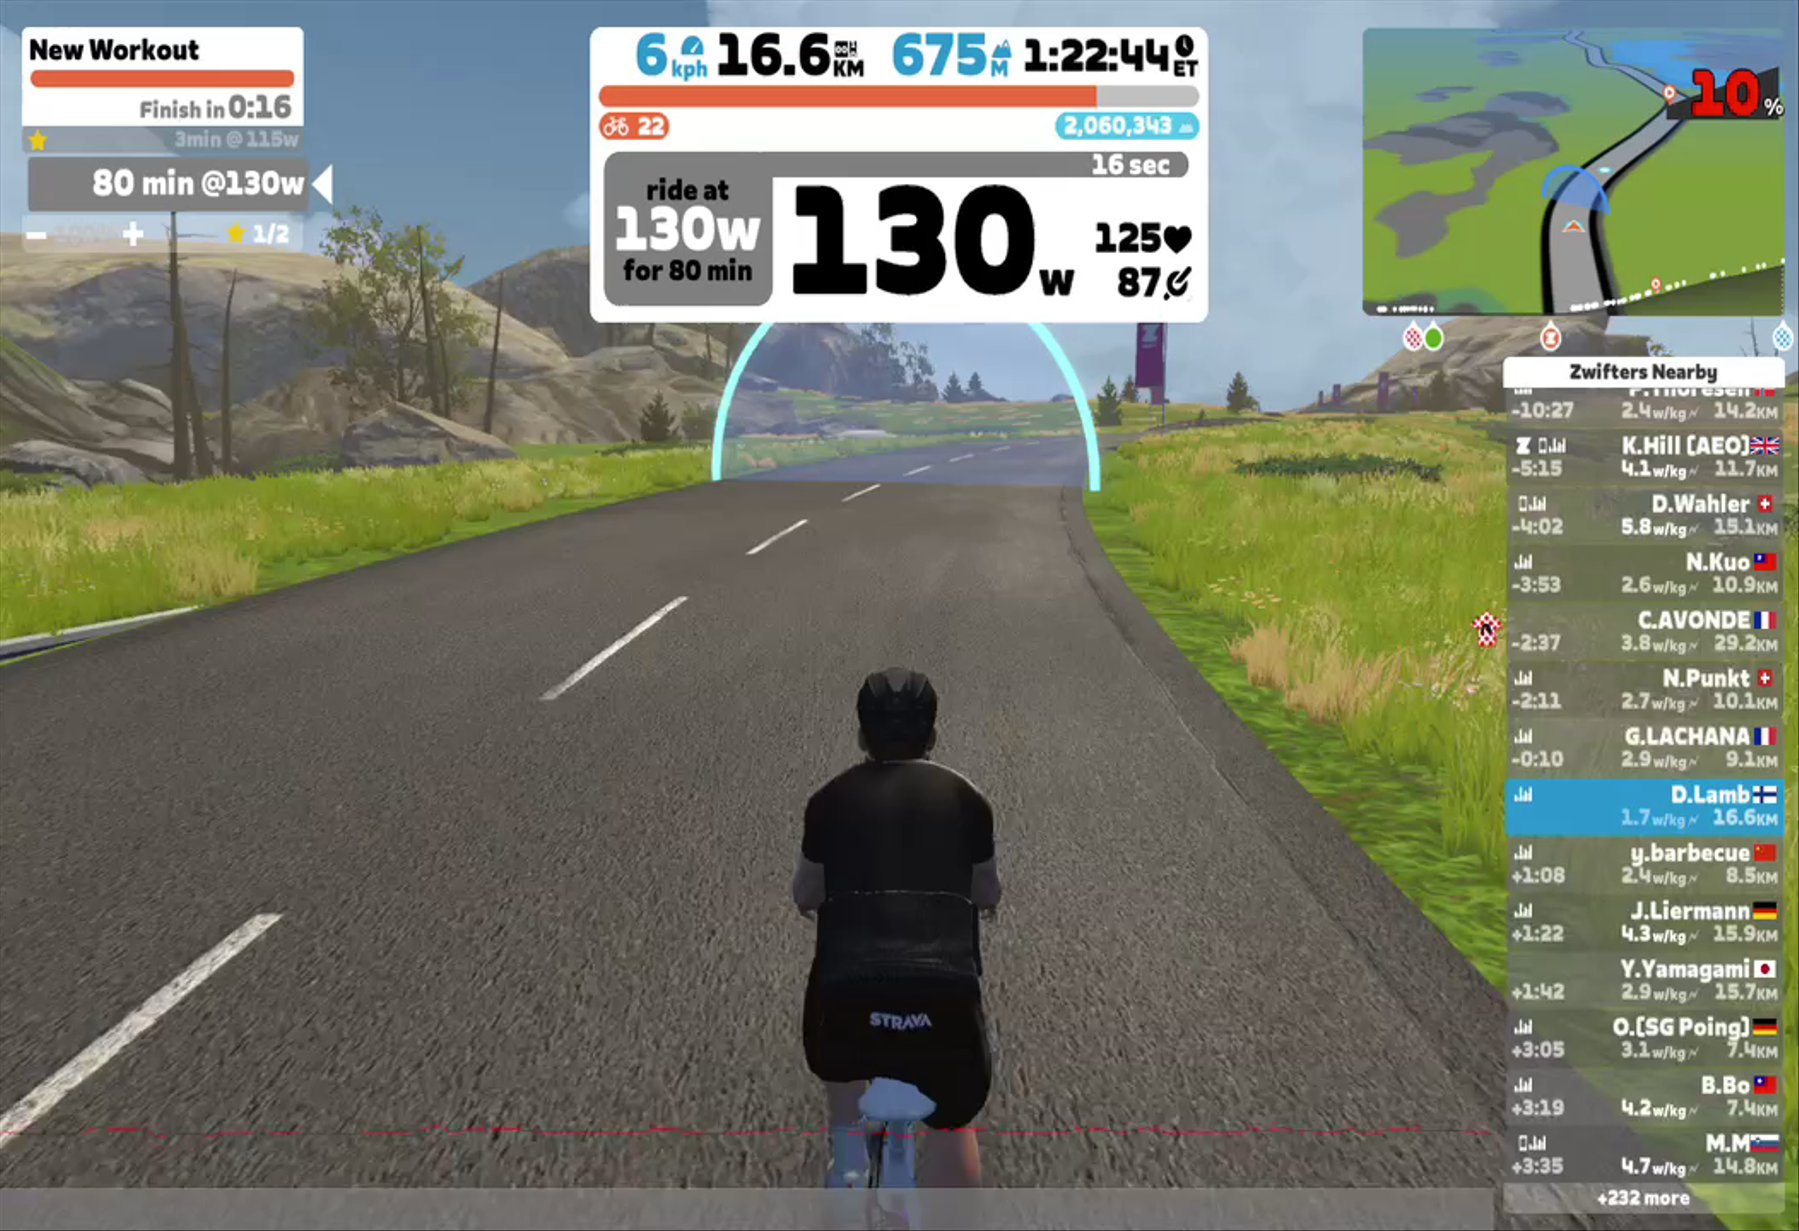 Zwift - New Workout in France